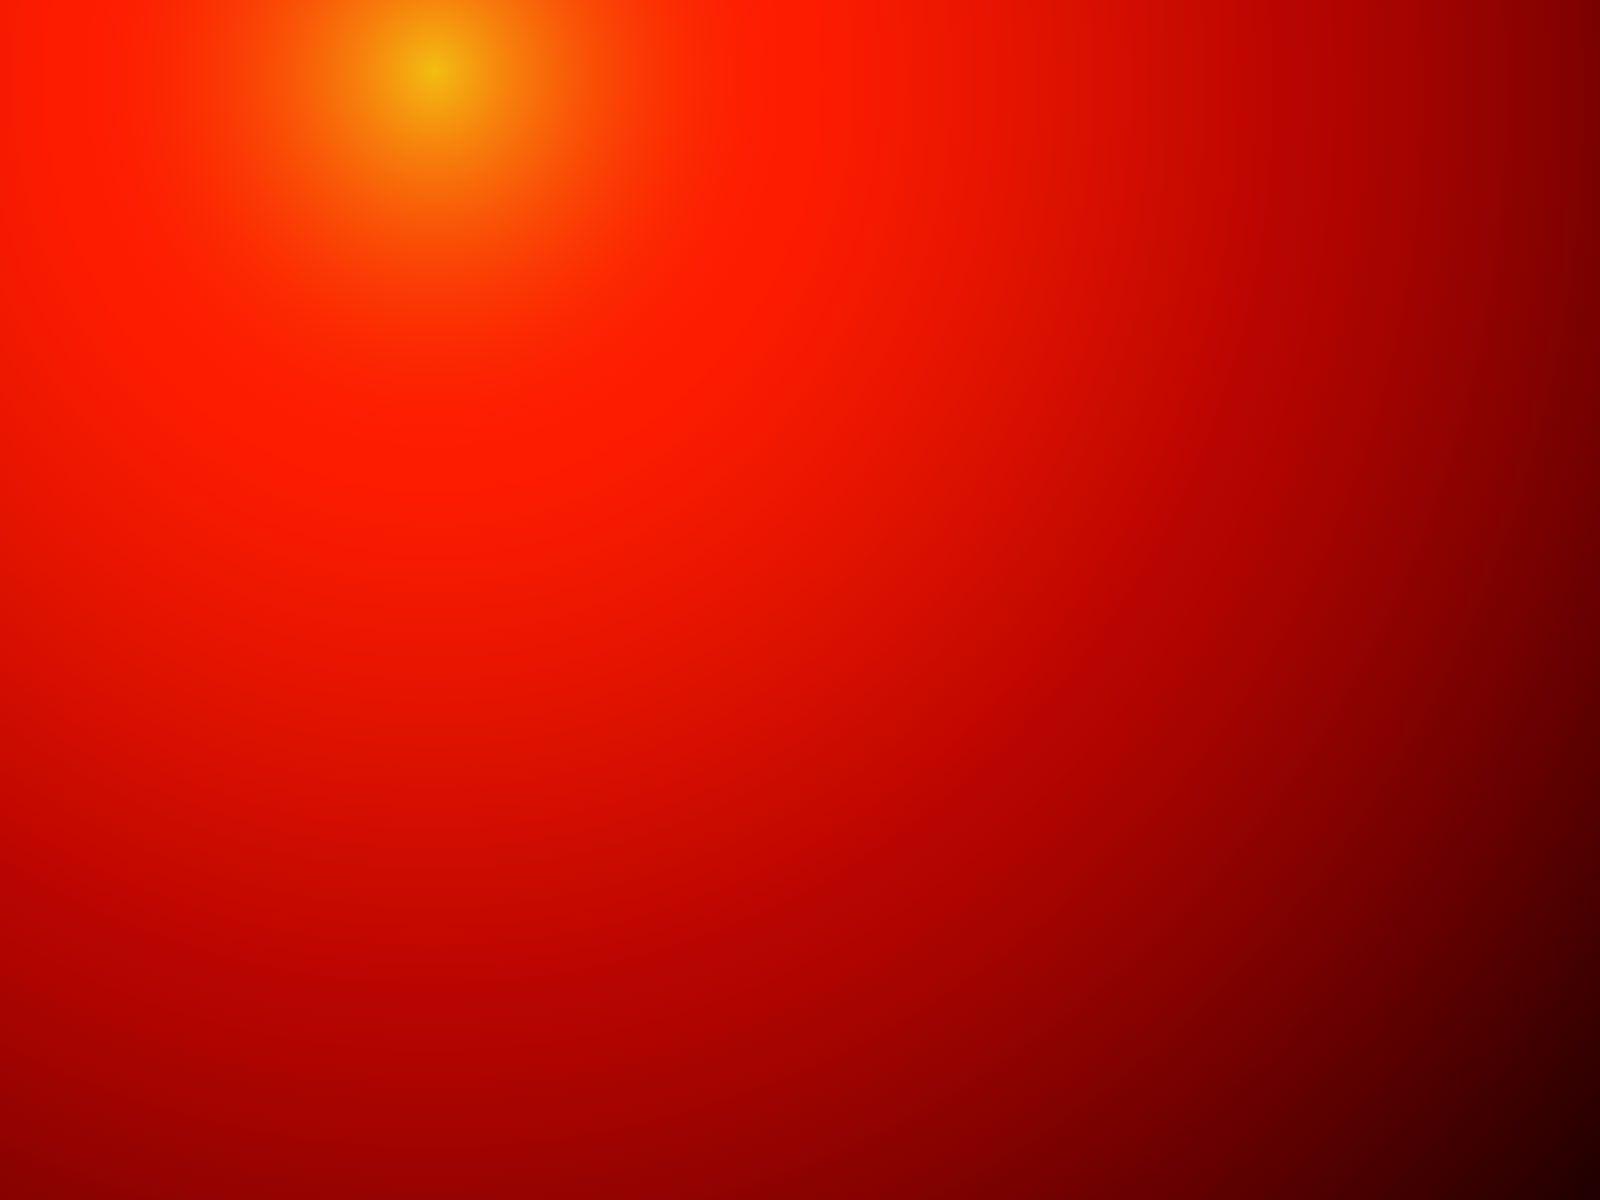 HD Desktop Wallpaper Red Wallpaper Red Wallpaper Red Background